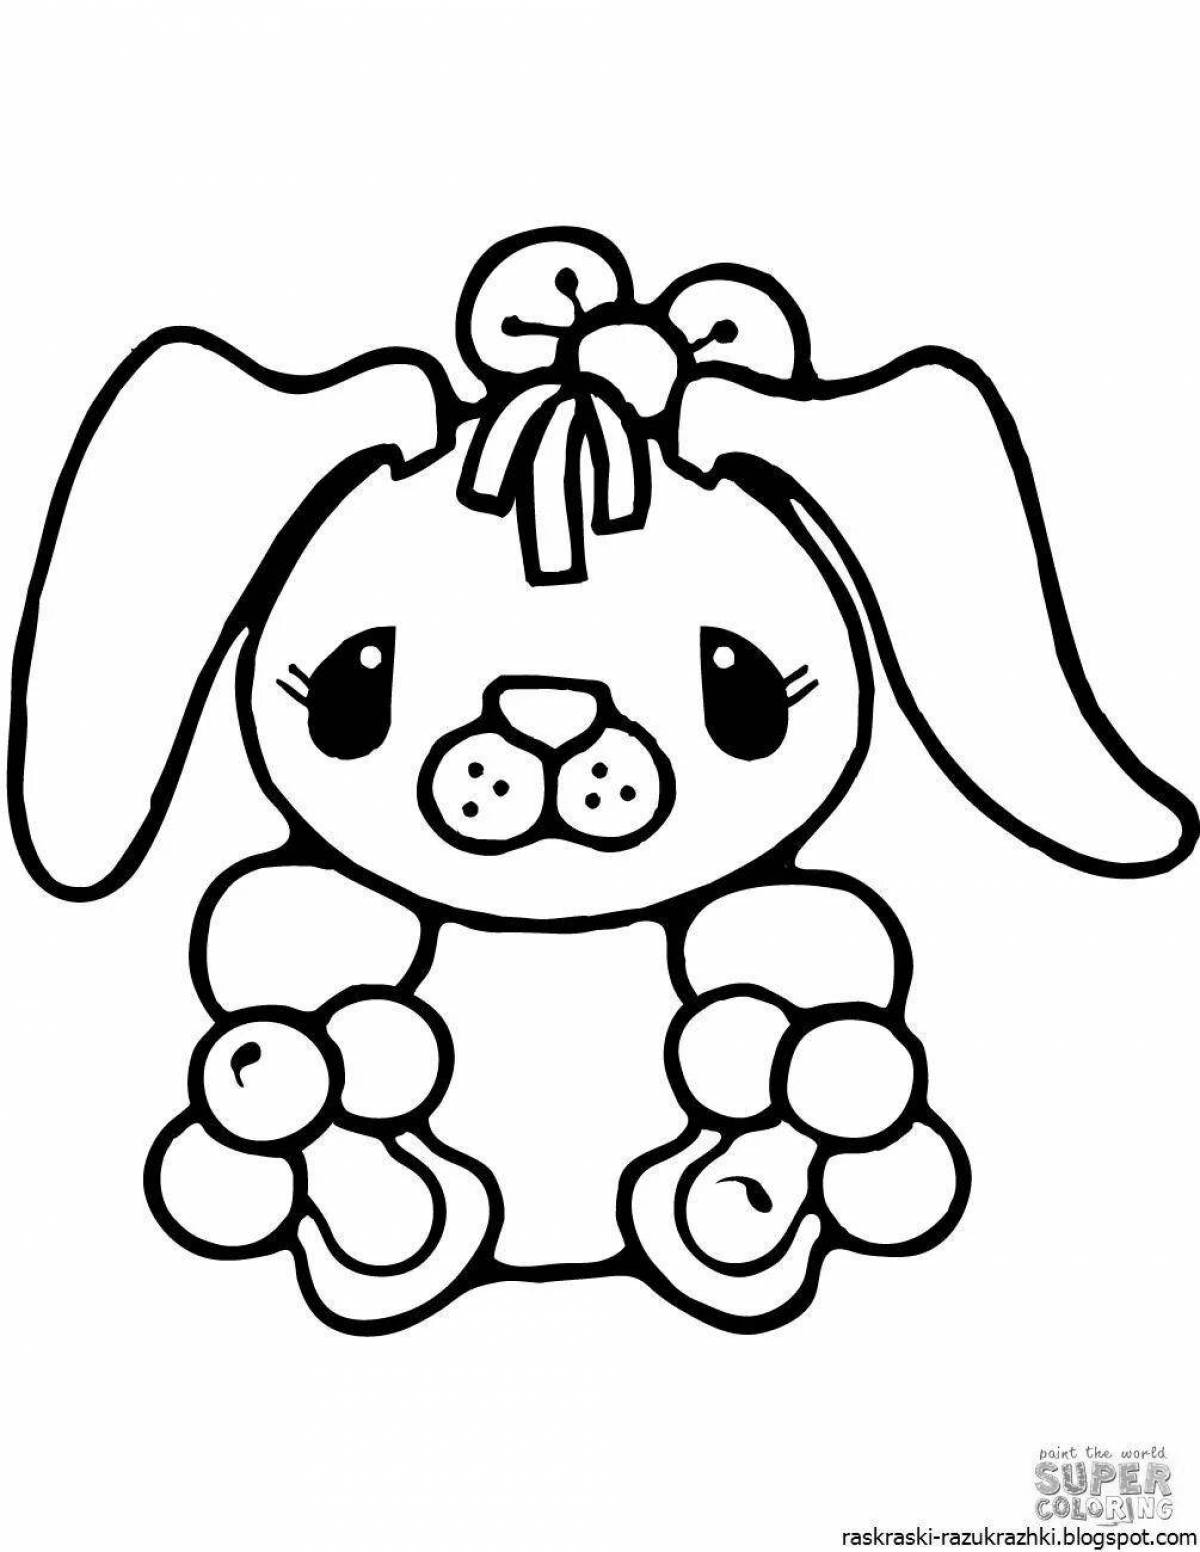 Cute and adorable bunny coloring book